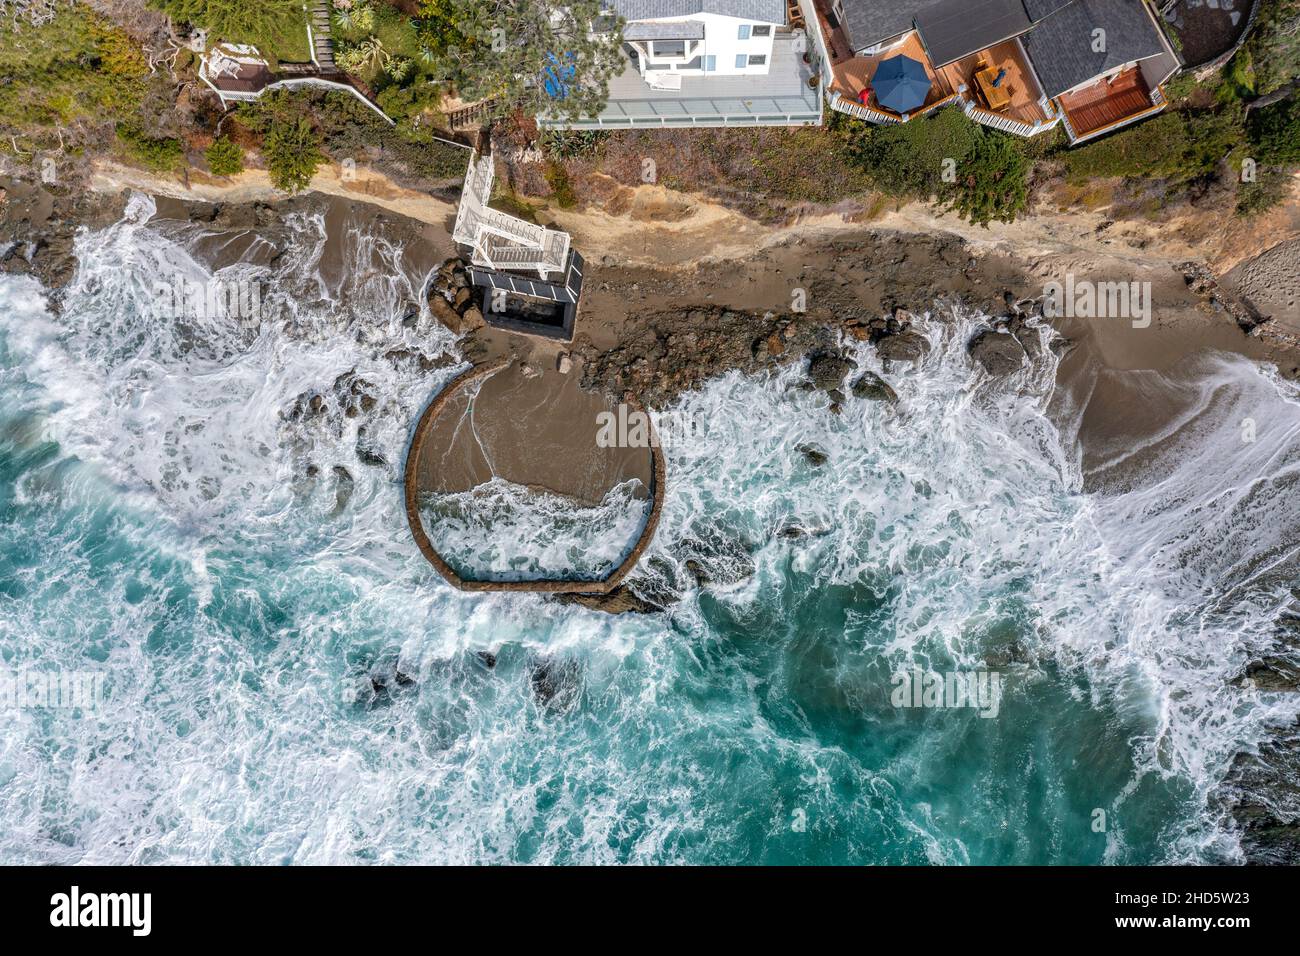 Aerial view of Victoria Beach with the famous pirate's Tower, an area of Orange County California for the wealthy and affluent, shows the crashing wav Stock Photo